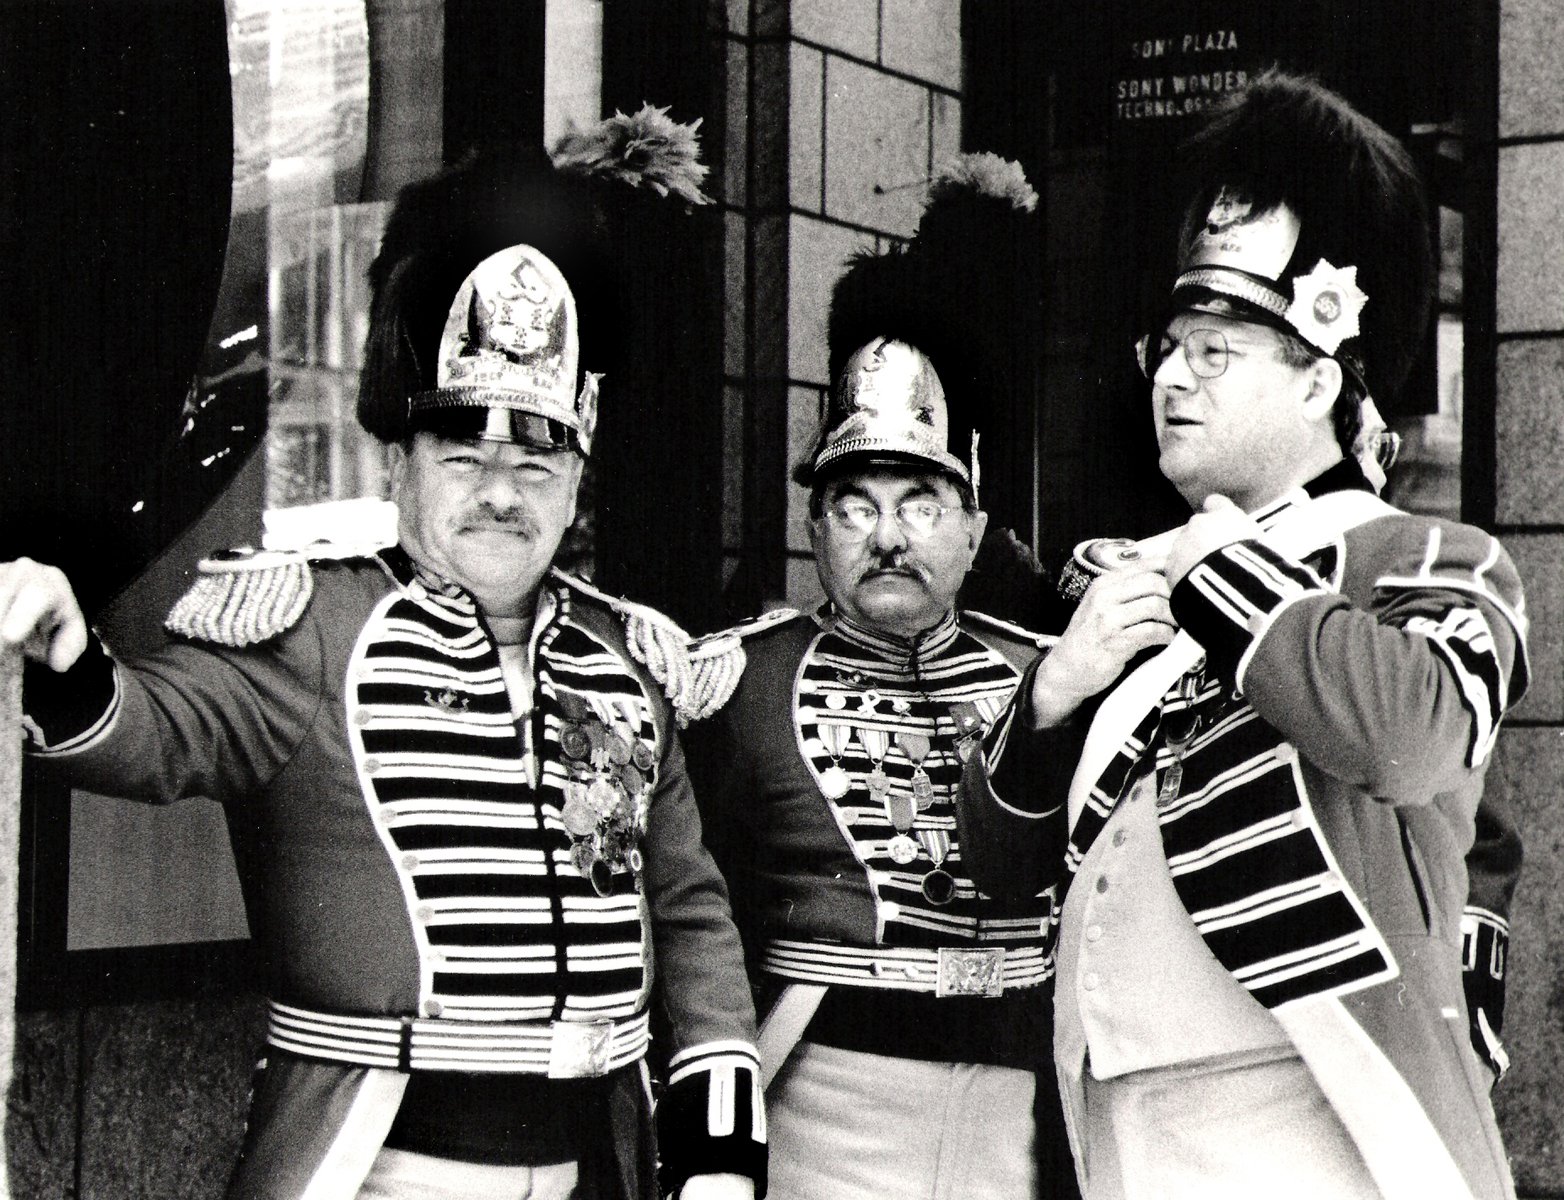 some military men in striped uniforms standing on the street